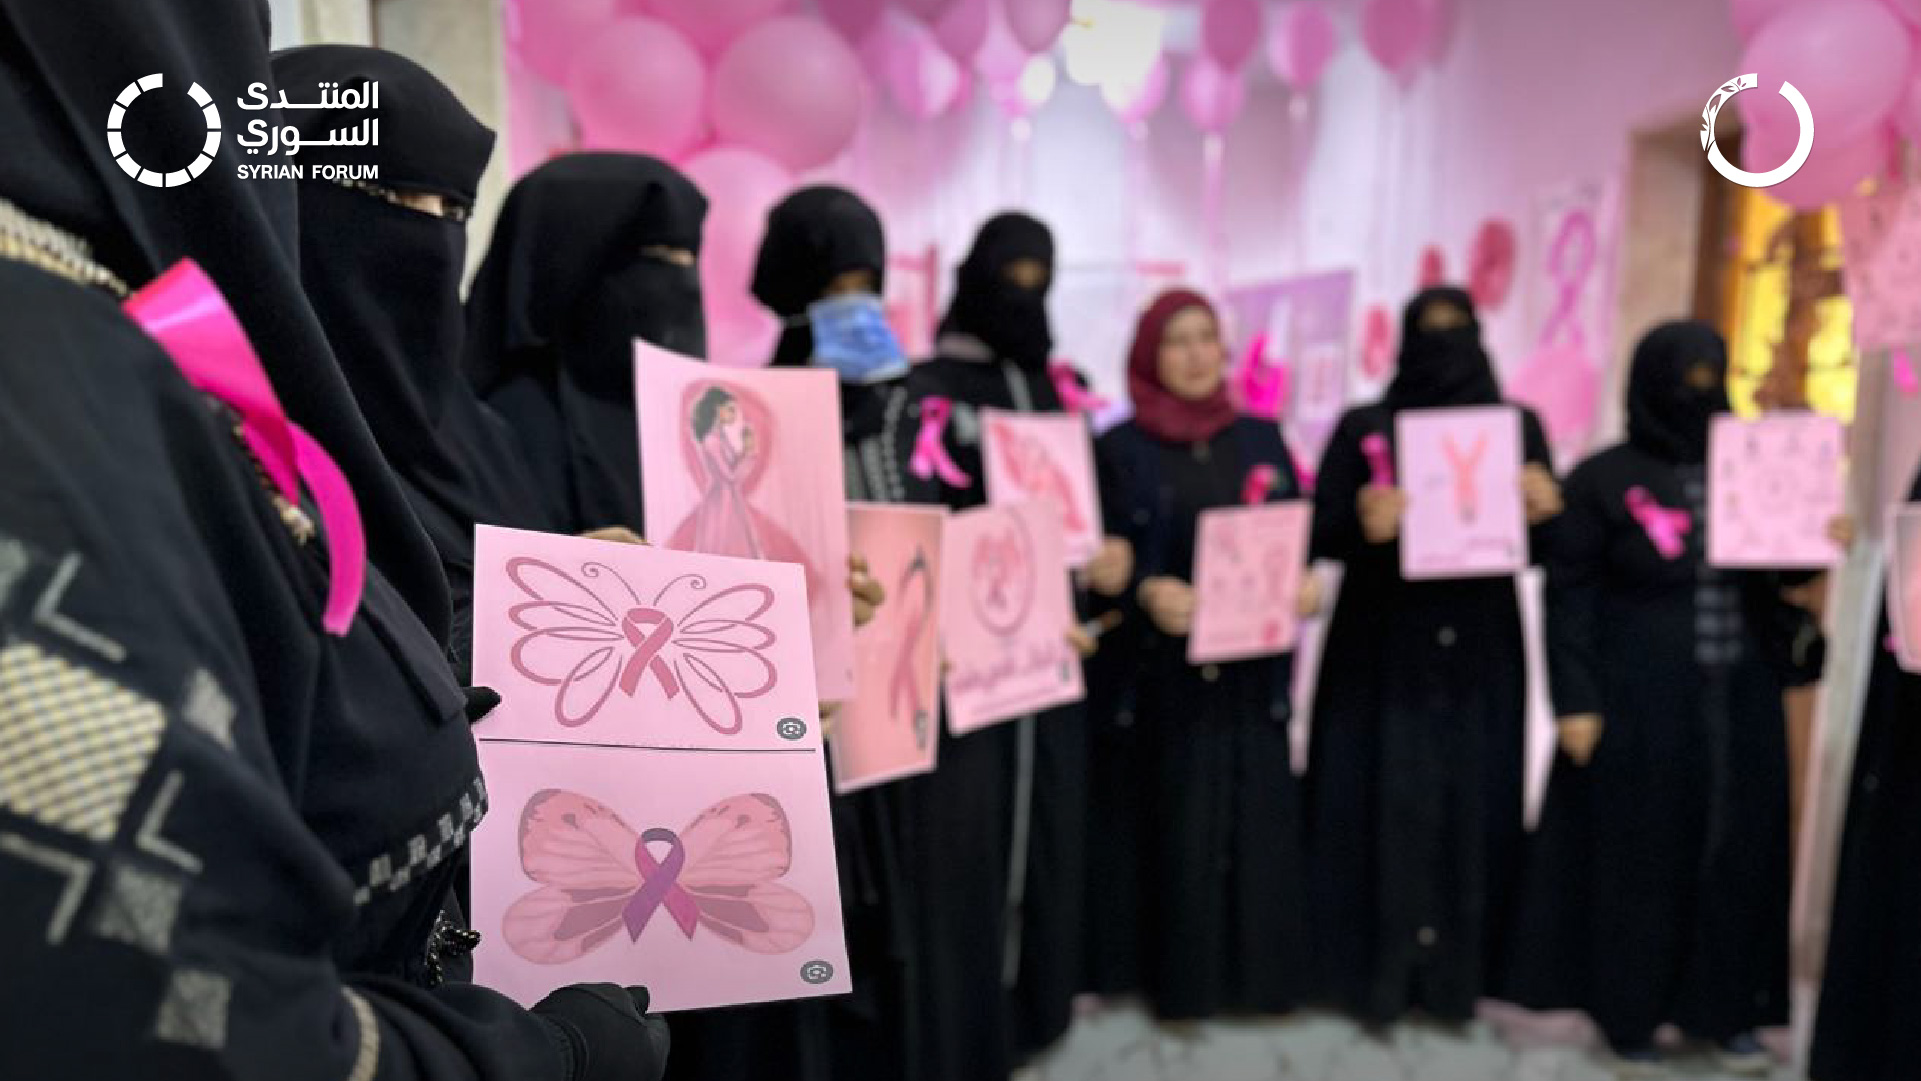 Breast cancer awareness in northern Syria: Efforts to improve healthcare access and promote early detection